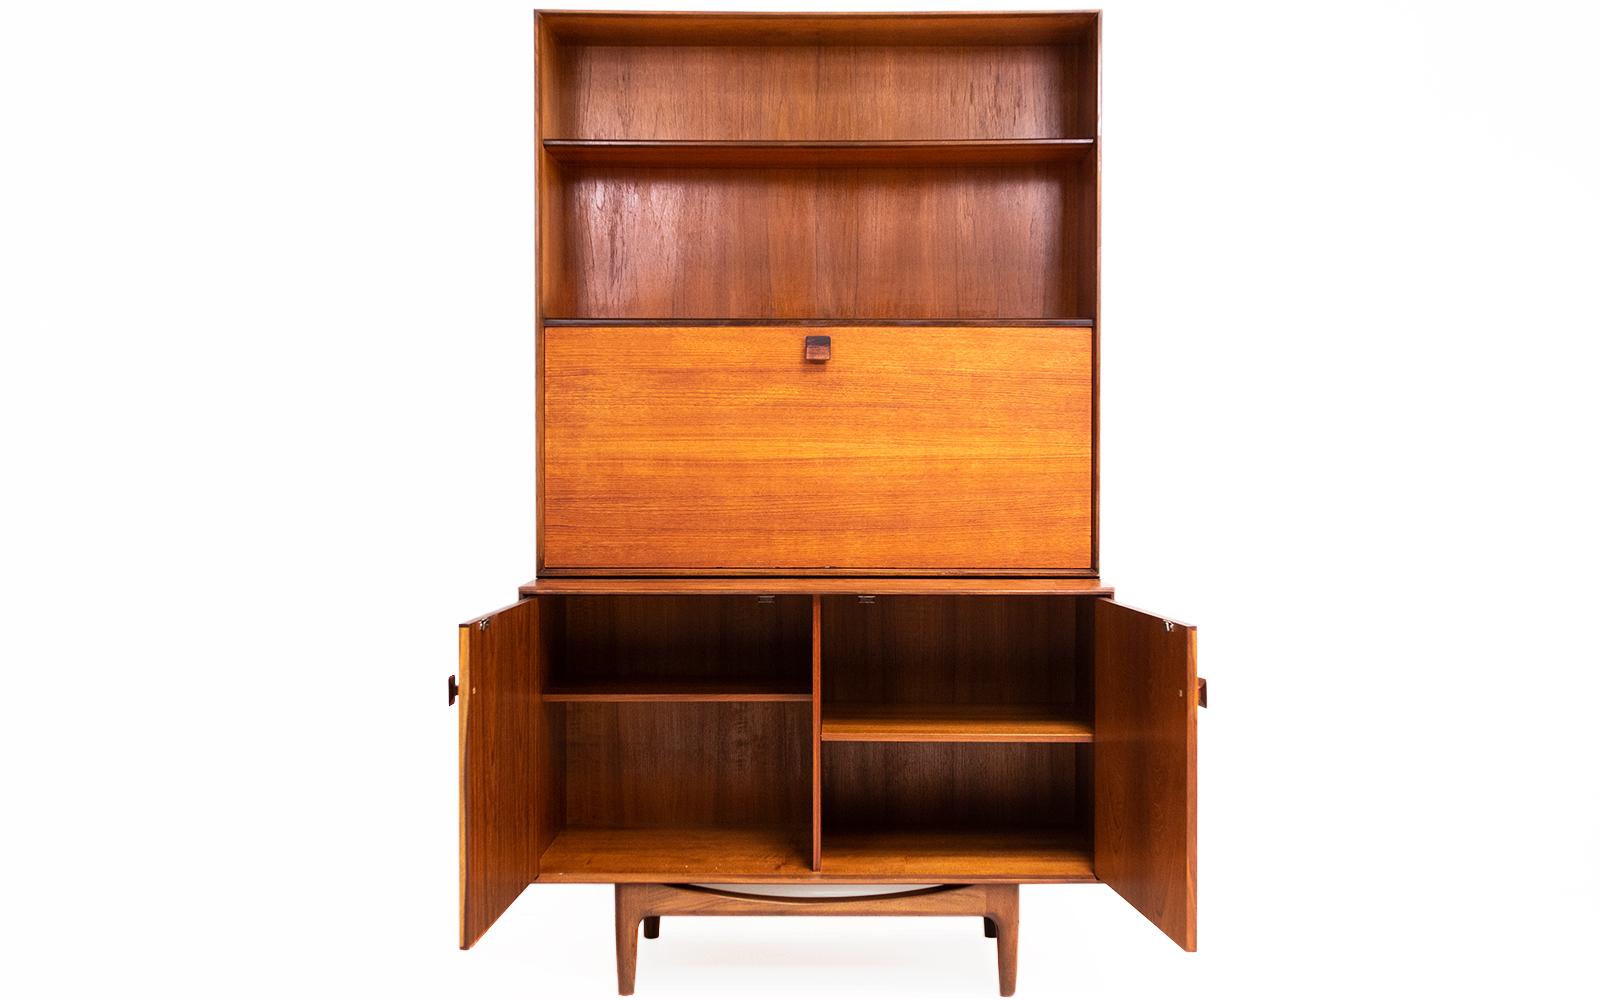 Kofod Larsen wall unit 

Signed 1960s teak wall unit, designed by Ib Kofod-Larsen. 

Made in Great Britain by a Danish designer. The cabinet features two doors with original pull handles and internal shelving. 

A very versatile upper section